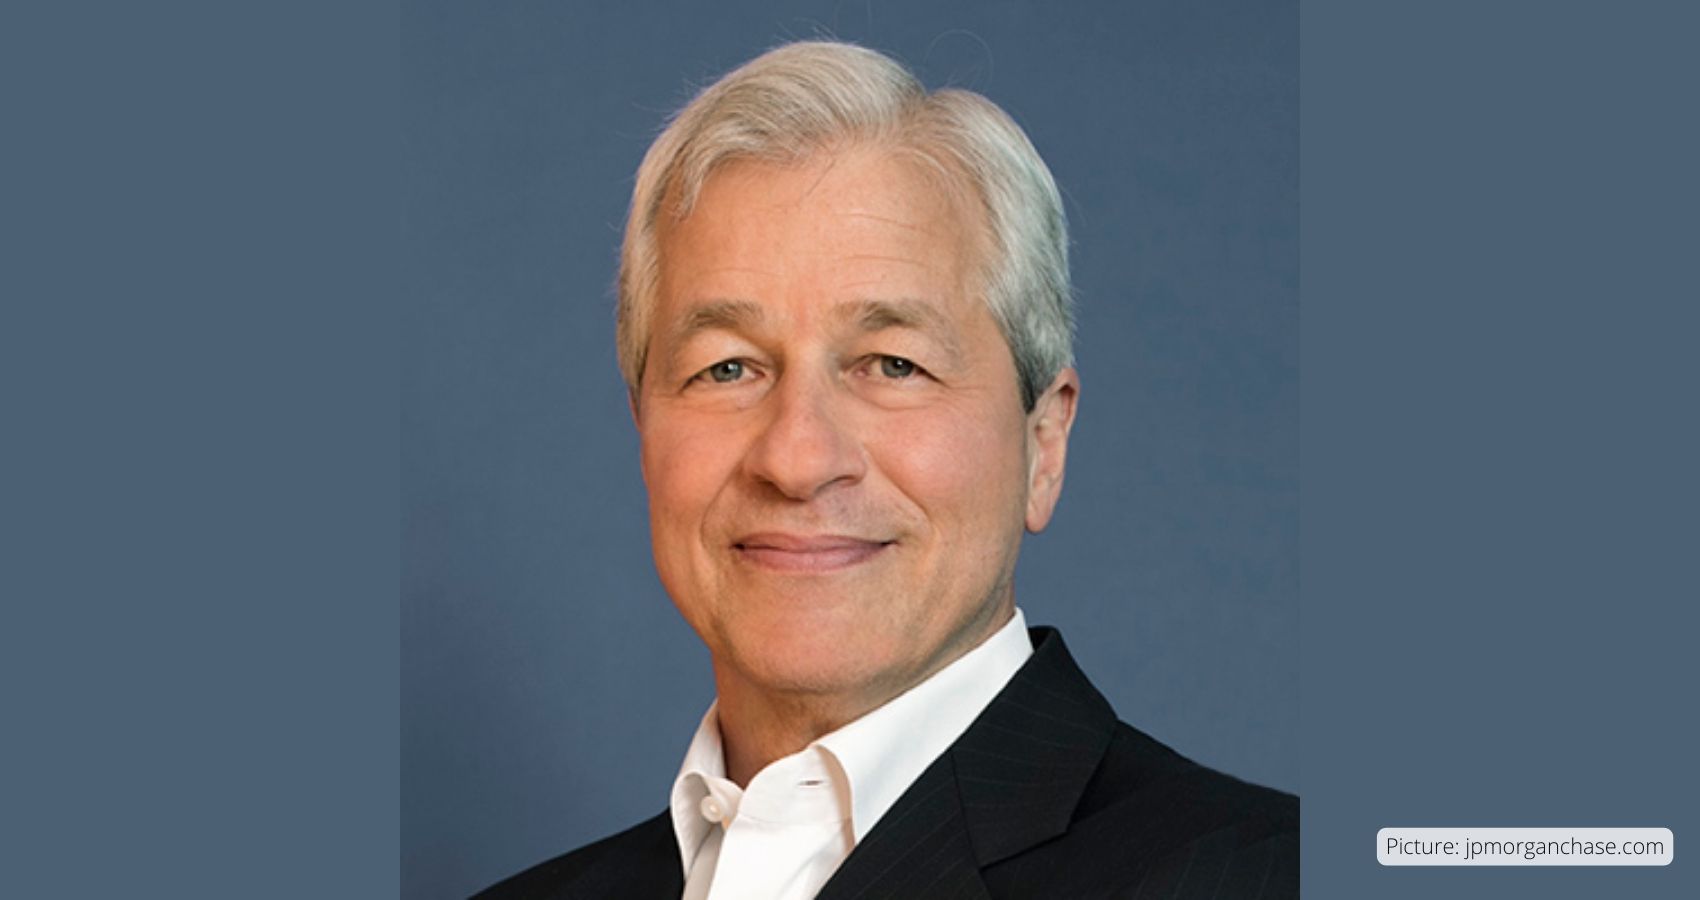 Feature and Cover JPMorgan Chase CEO Warns of Potential Surge in US Interest Rates Highlights Economic Uncertainties